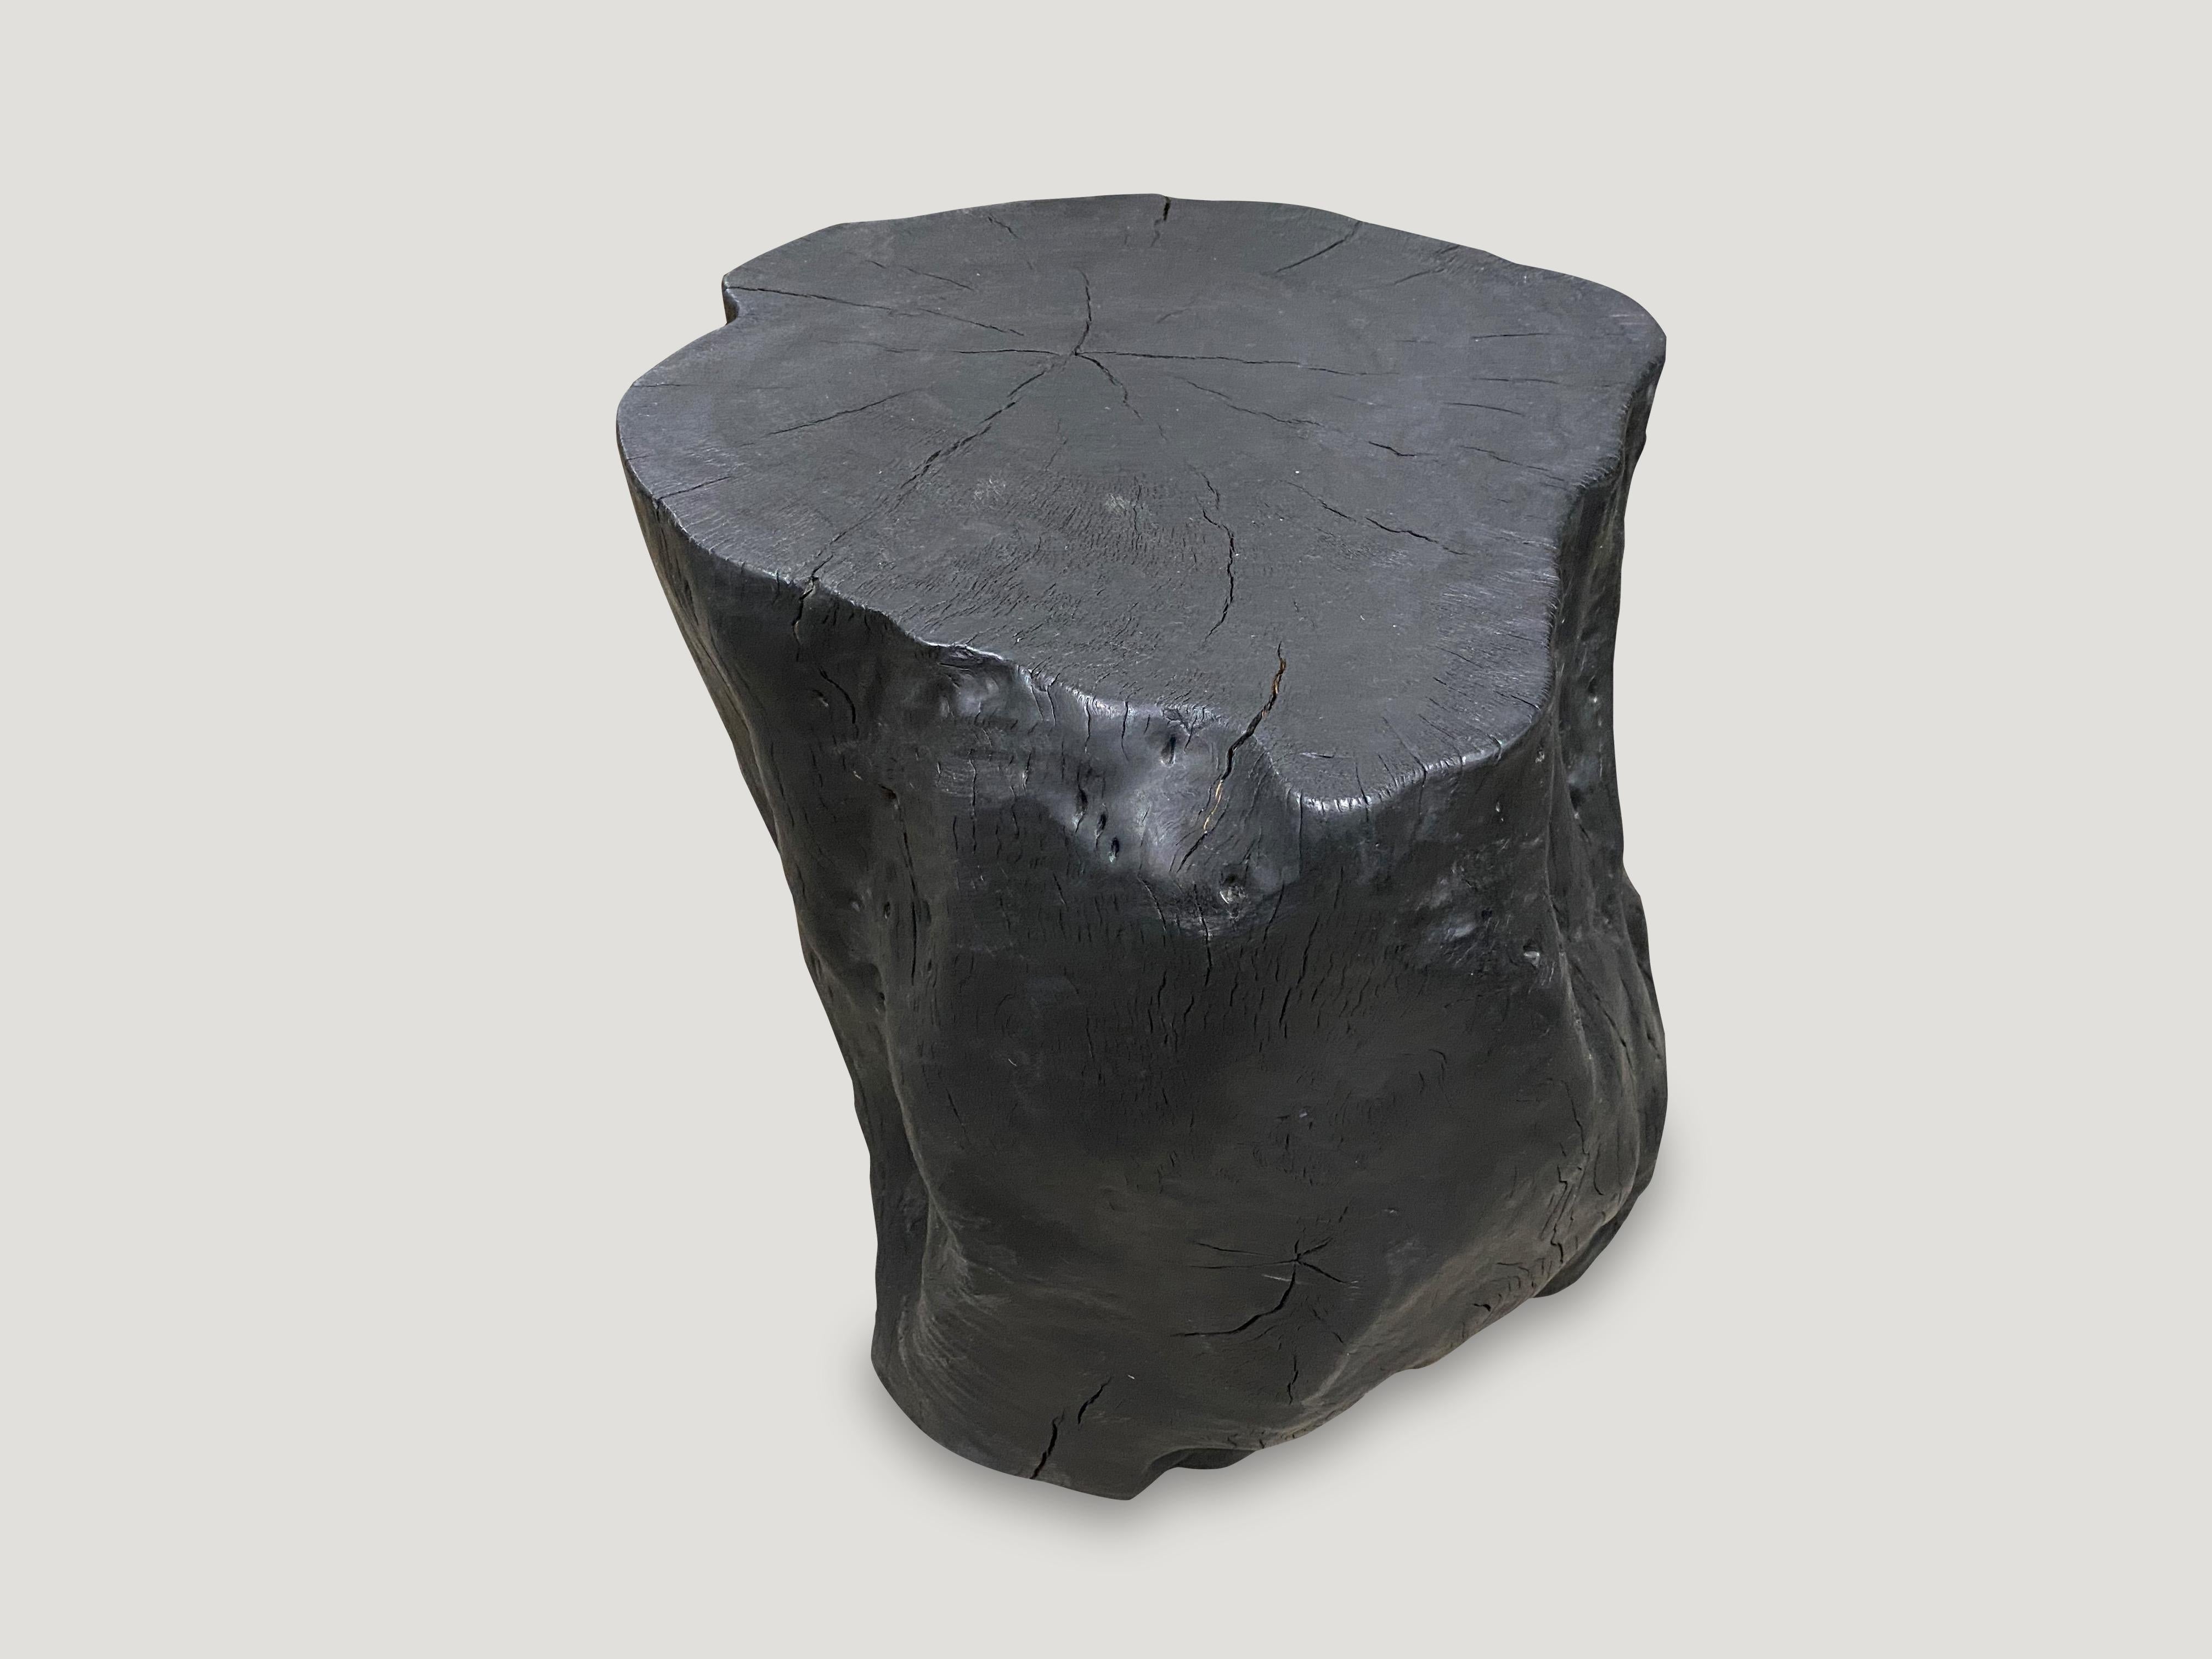 Reclaimed lychee wood side table. Burnt, sanded and sealed whilst respecting the natural organic shape and exposing the beautiful grain of the wood. We have a collection. All unique. The price and size reflect the one shown.

The Triple Burnt